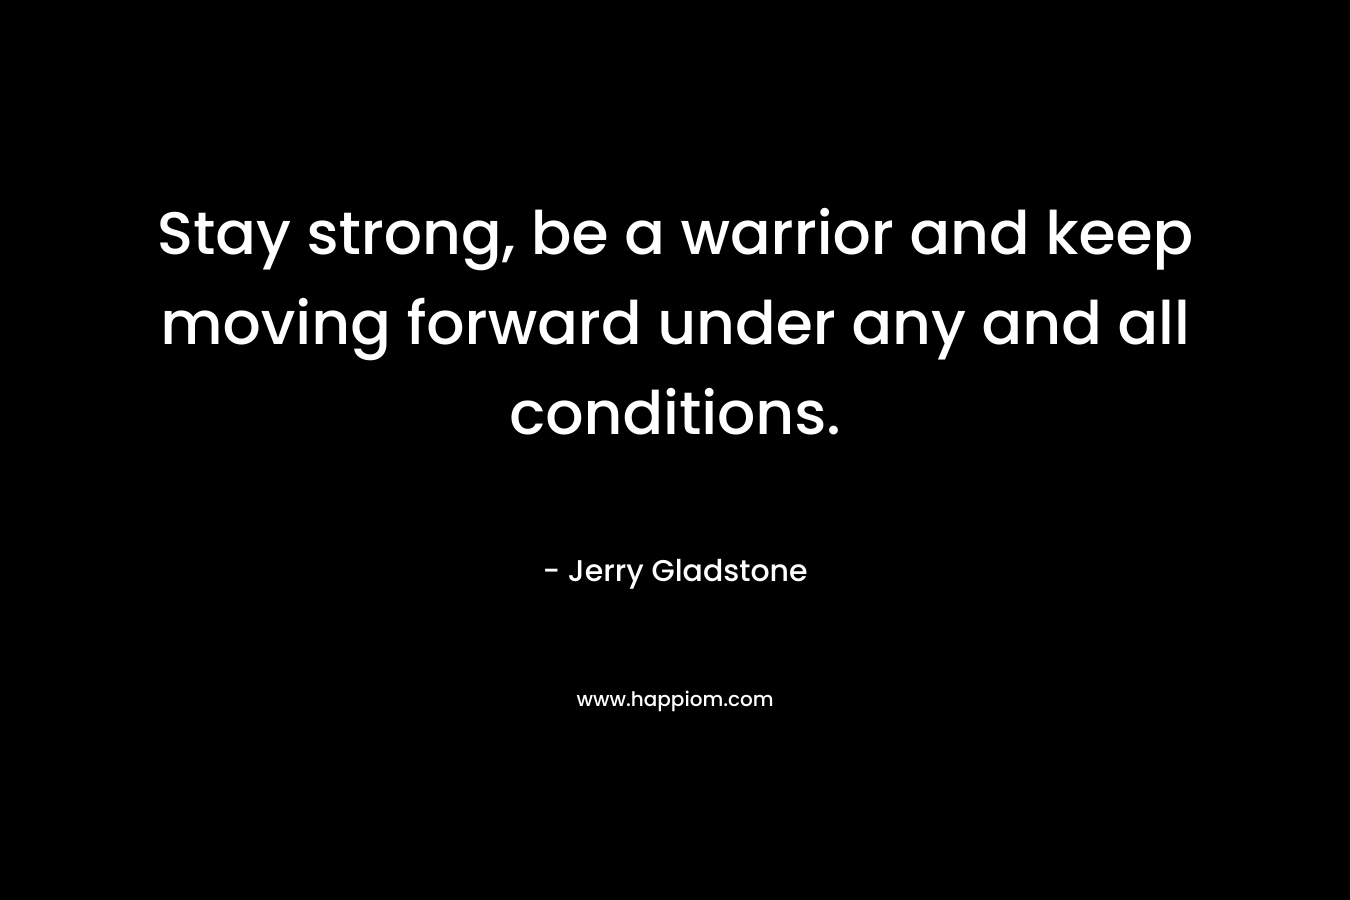 Stay strong, be a warrior and keep moving forward under any and all conditions.